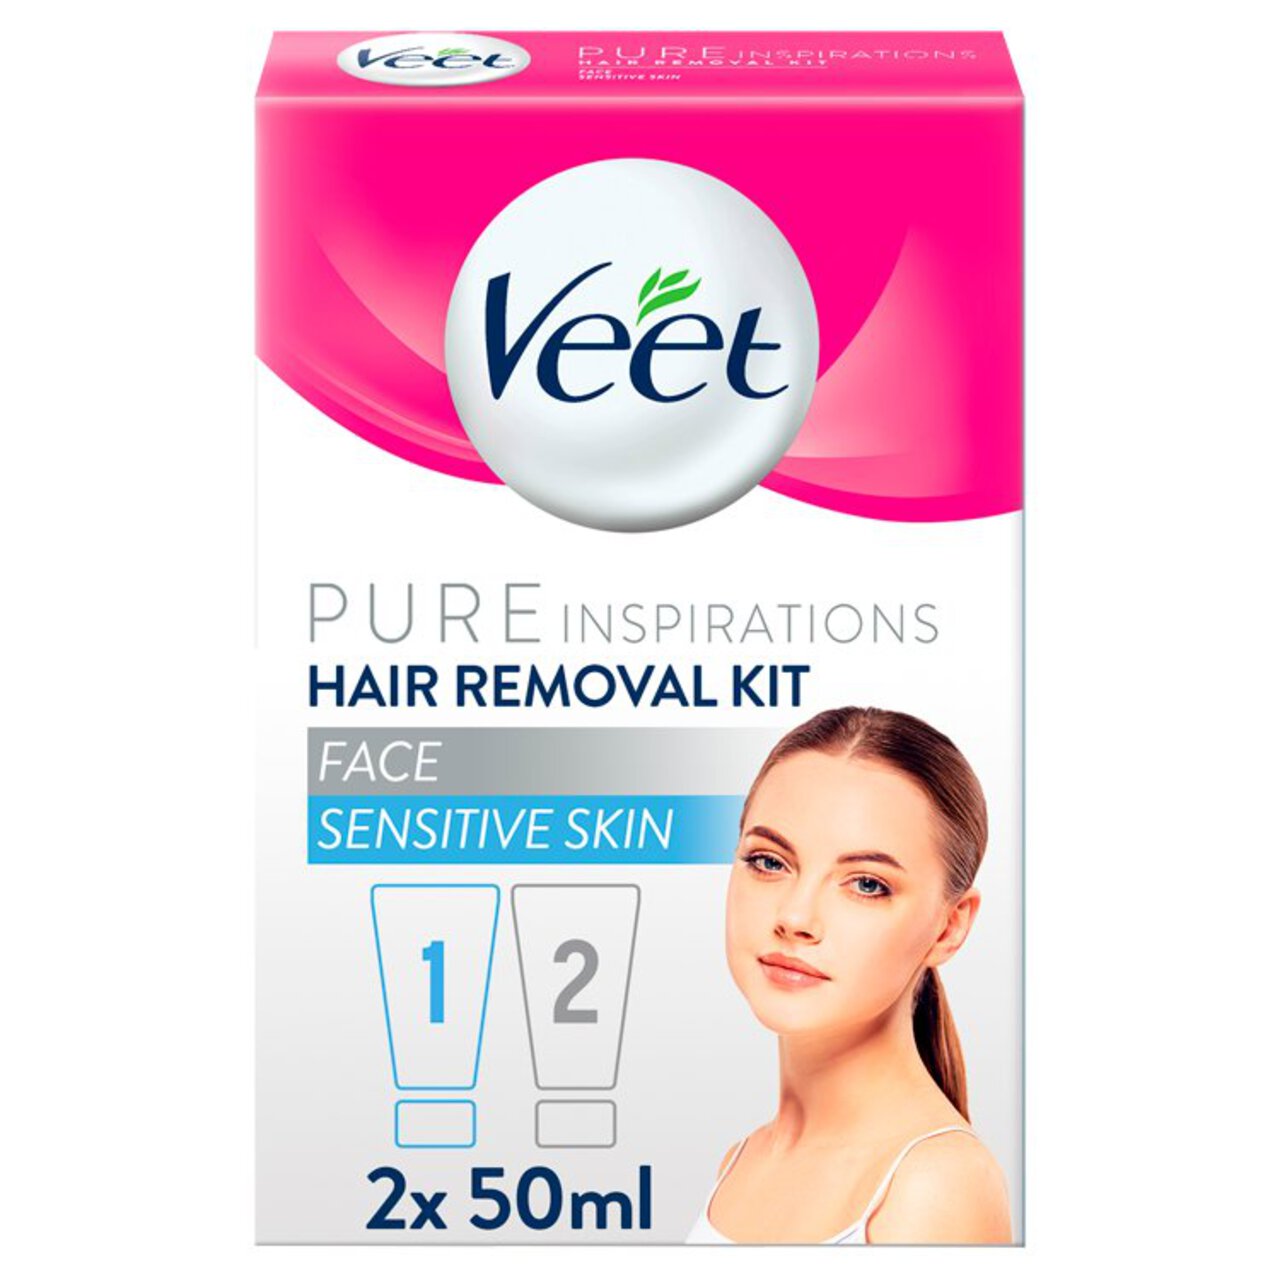 Veet Pure Inspirations Face Hair Removal Kit for Sensitive Skin 2 x 50ml